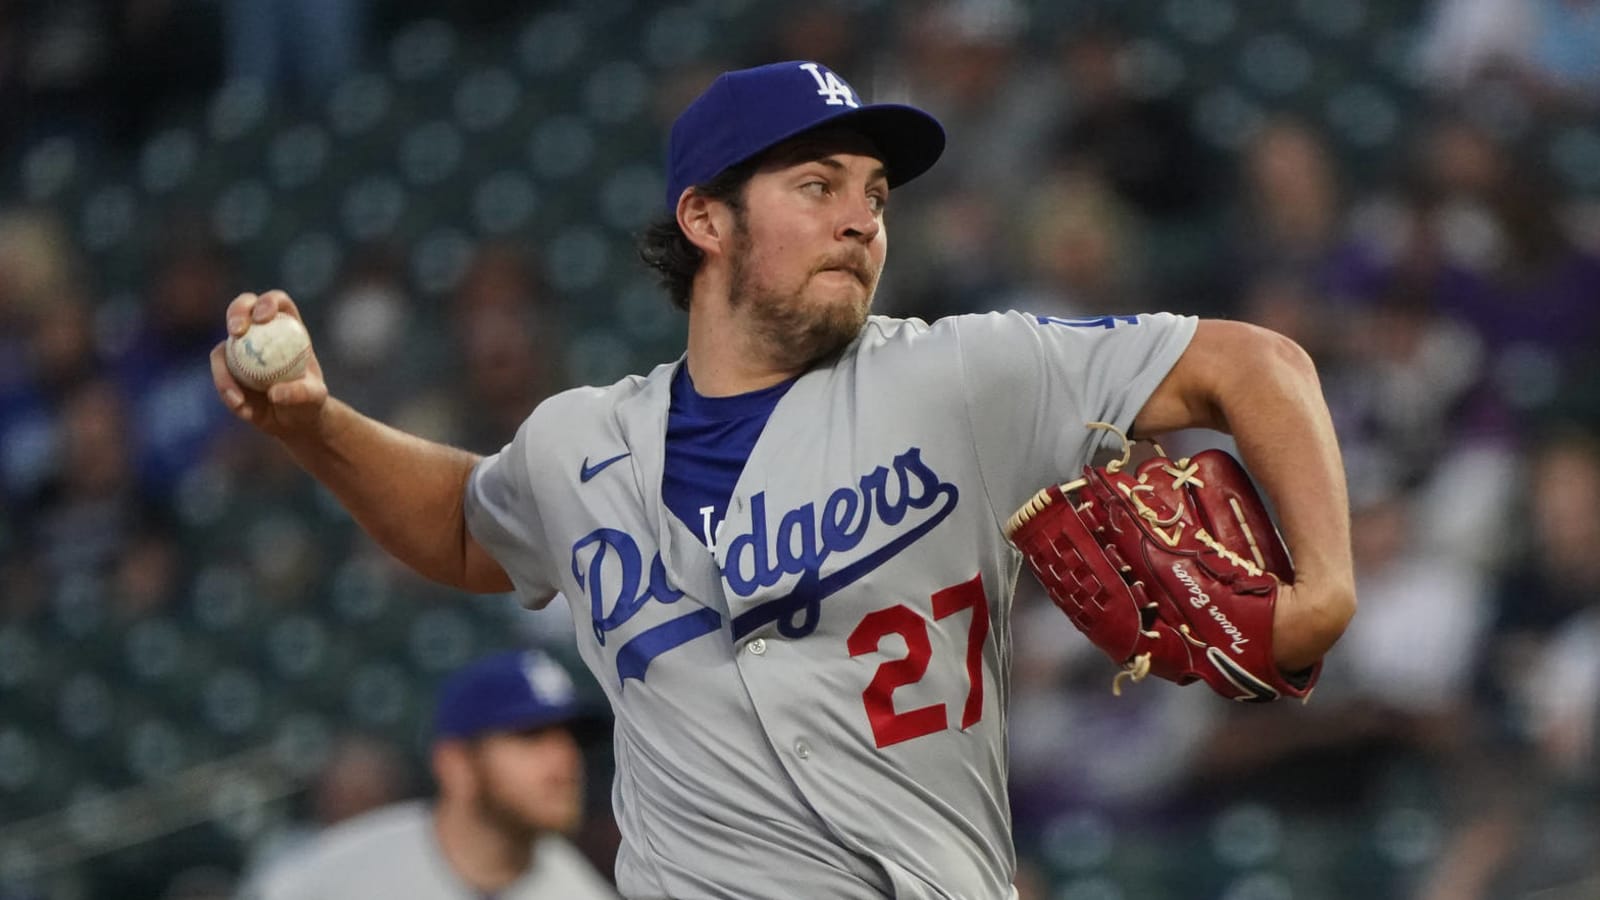 Reviewing the Dodgers' offseason moves